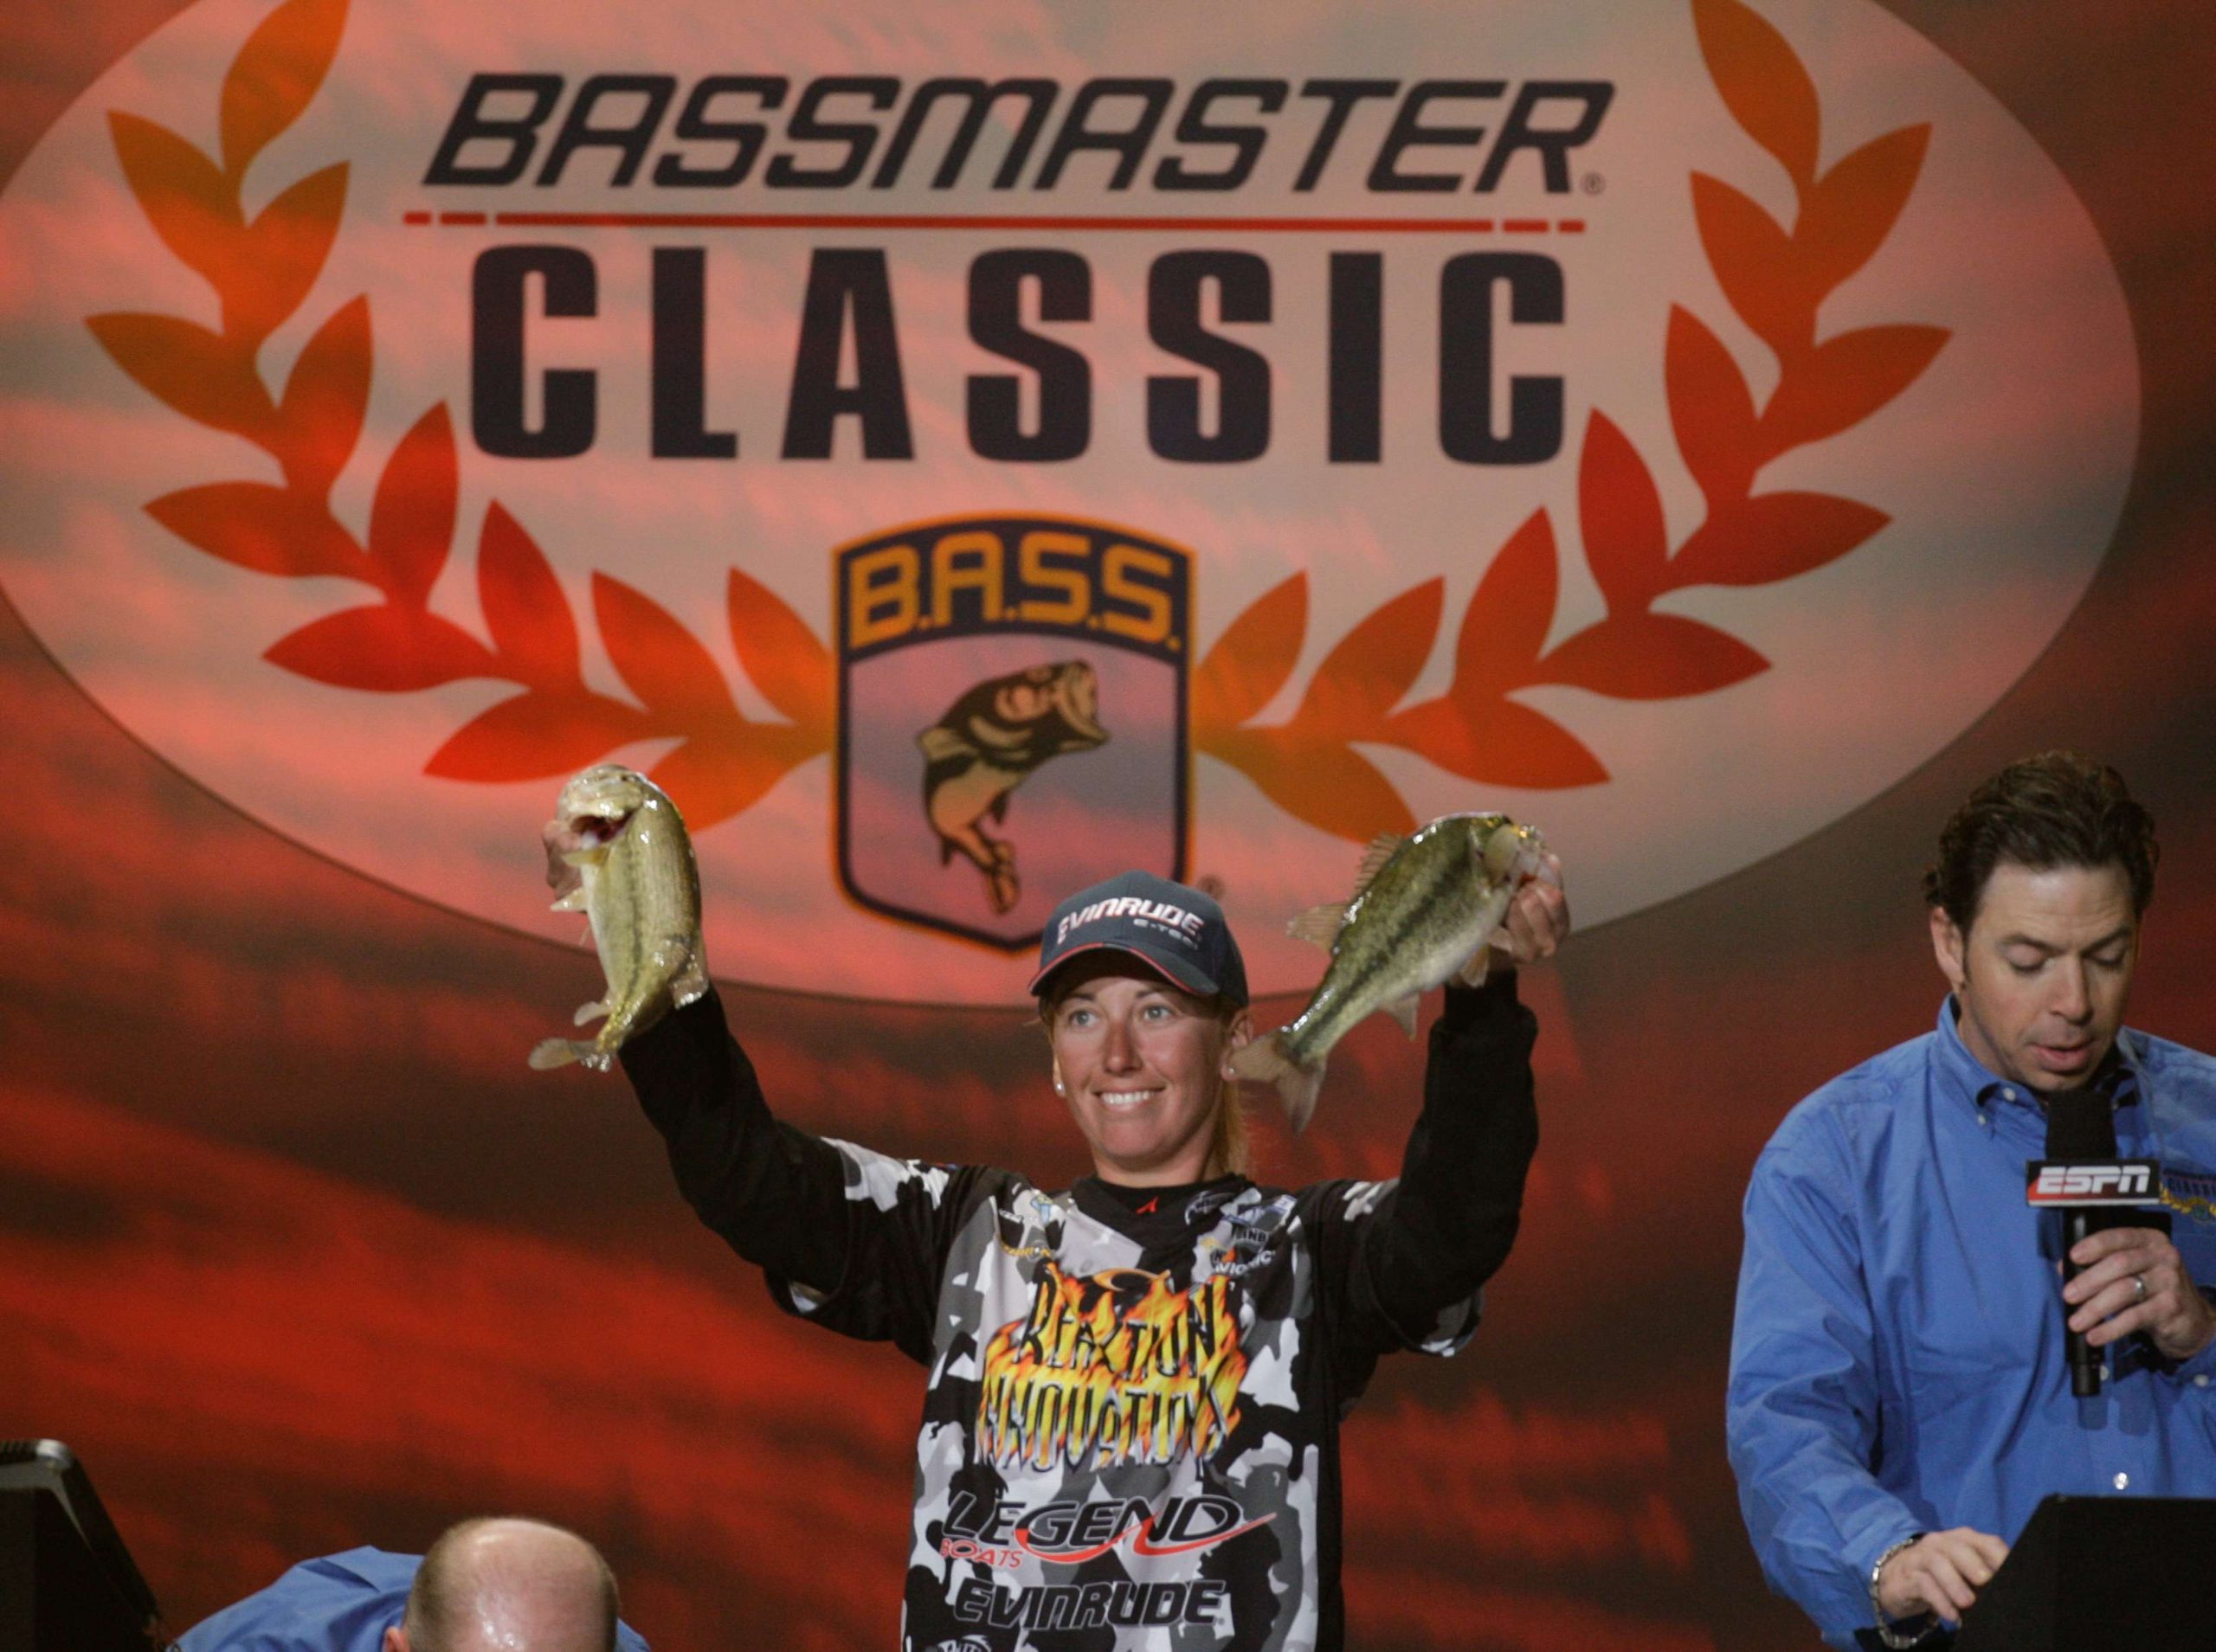 <p><strong><u>First woman in the Classic</u></strong></p>
<p>Kim Bain-Moore was the first woman to compete in the Bassmaster Classic. She earned a berth by winning the Women's Bassmaster Tour Championship in 2008, and she went on to finish 47th in the 2009 Bassmaster Classic. The following year, Pam Martin-Wells earned the WBT's invitation to the Classic, and she finished 22nd in 2010. The WBT was discontinued then, and no other female has qualified for the Classic.</p>
